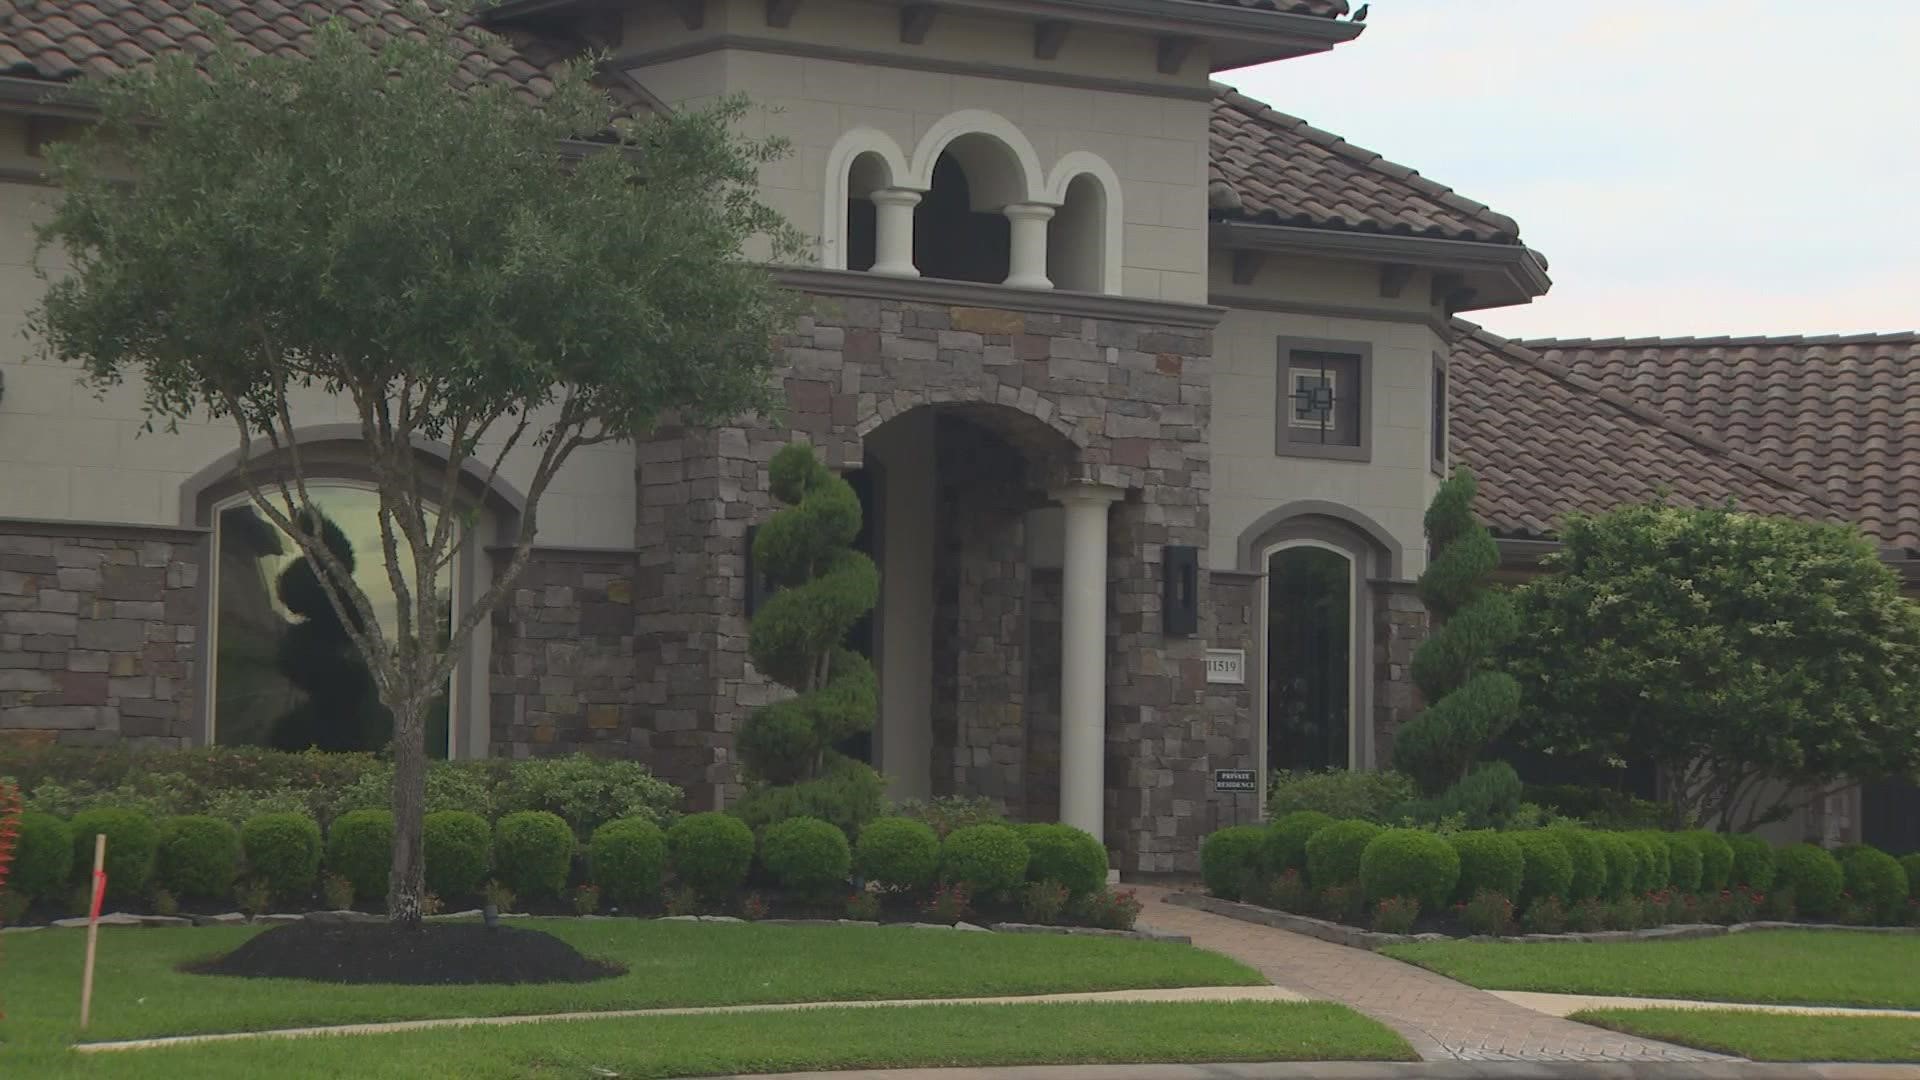 "That's a large tax increase that I'm fixing to have to pay," said Matt Morgan, a Fort Bend County resident.